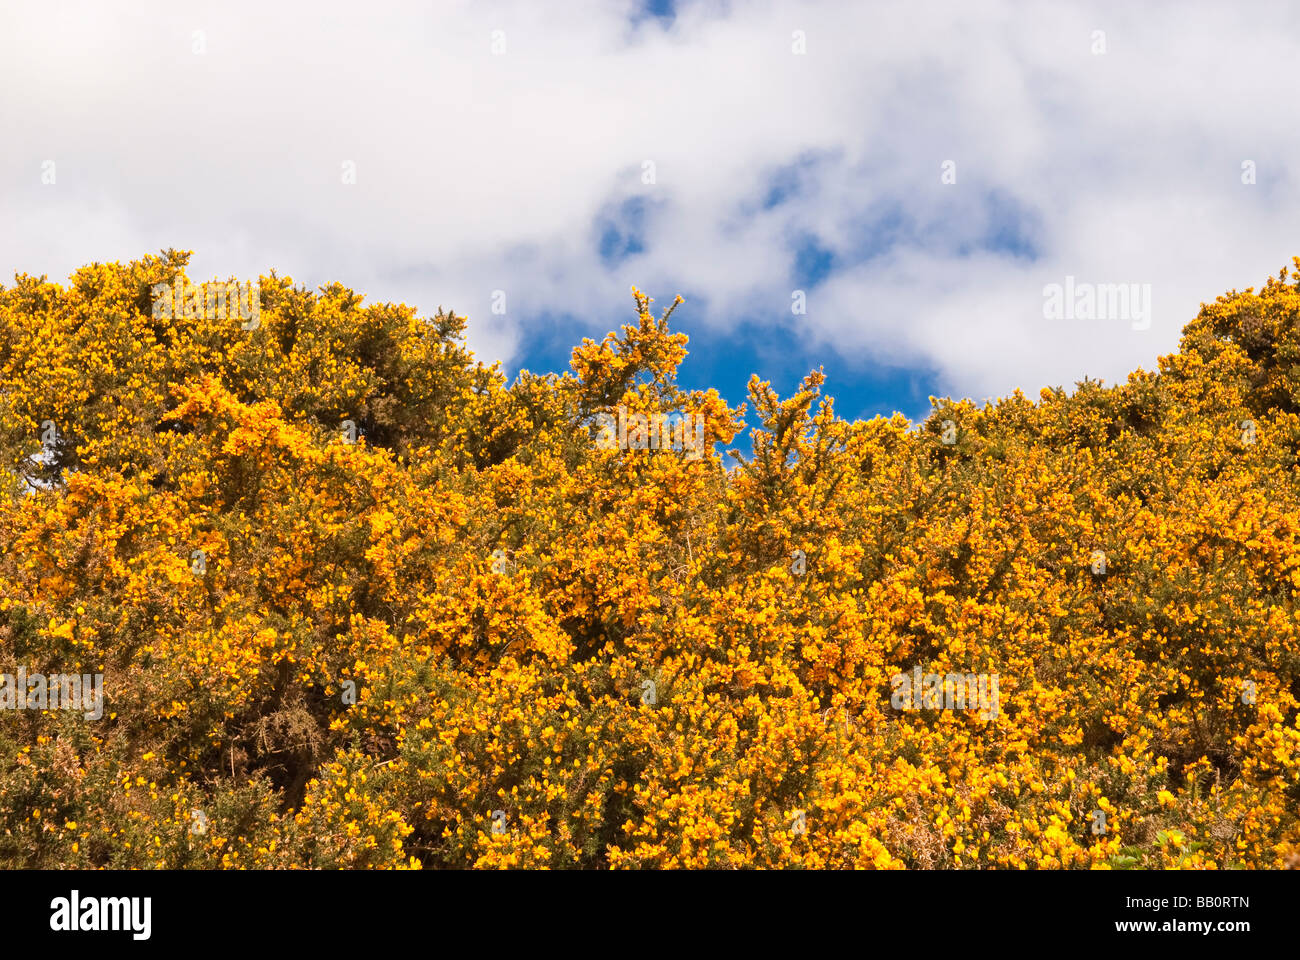 A Common gorse bush (ulex europaeus) against a blue sky with yellow flowers in the uk Stock Photo